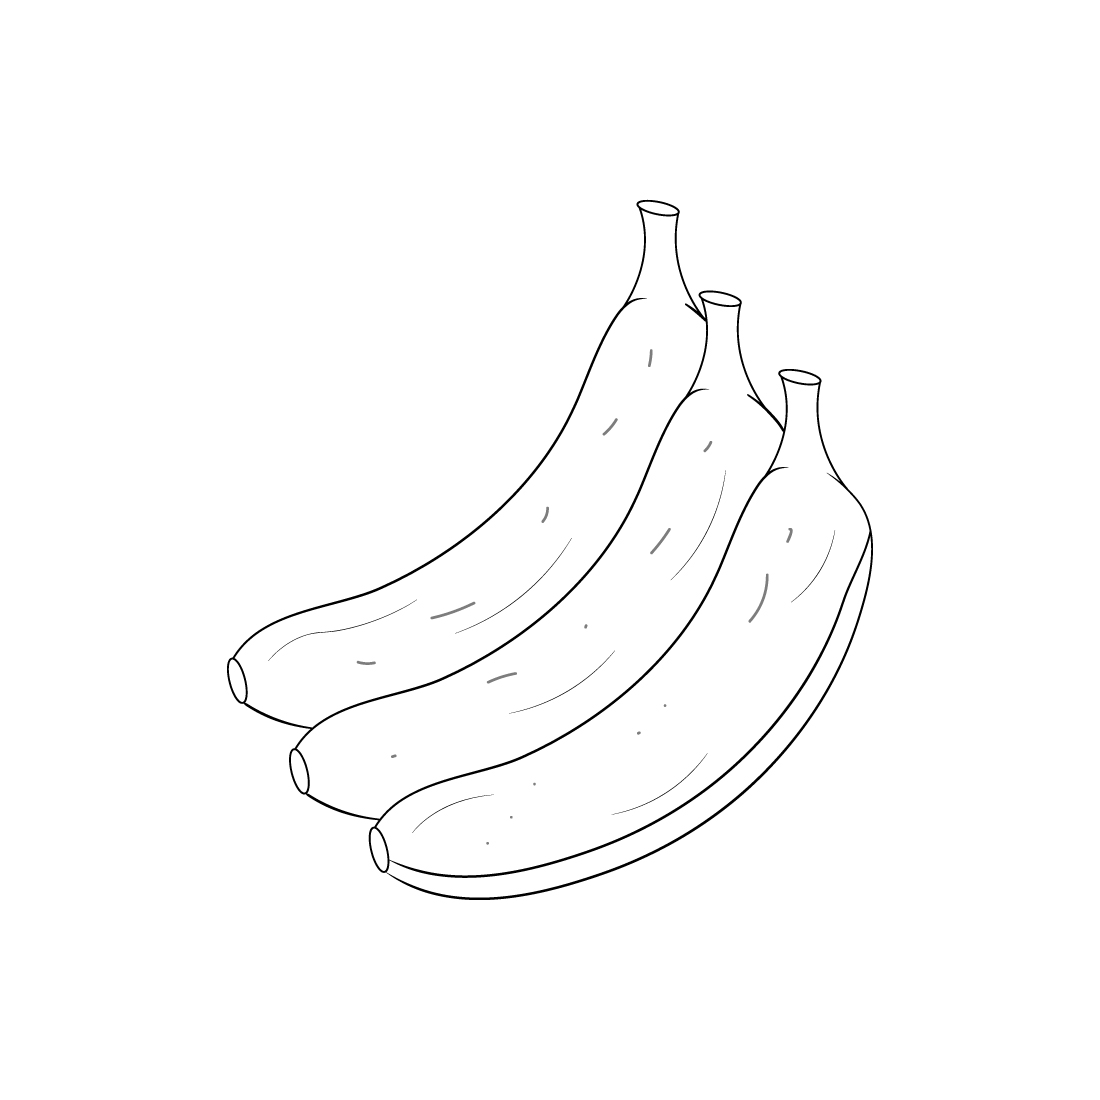 Banana Fruits Coloring Page For Adults preview image.